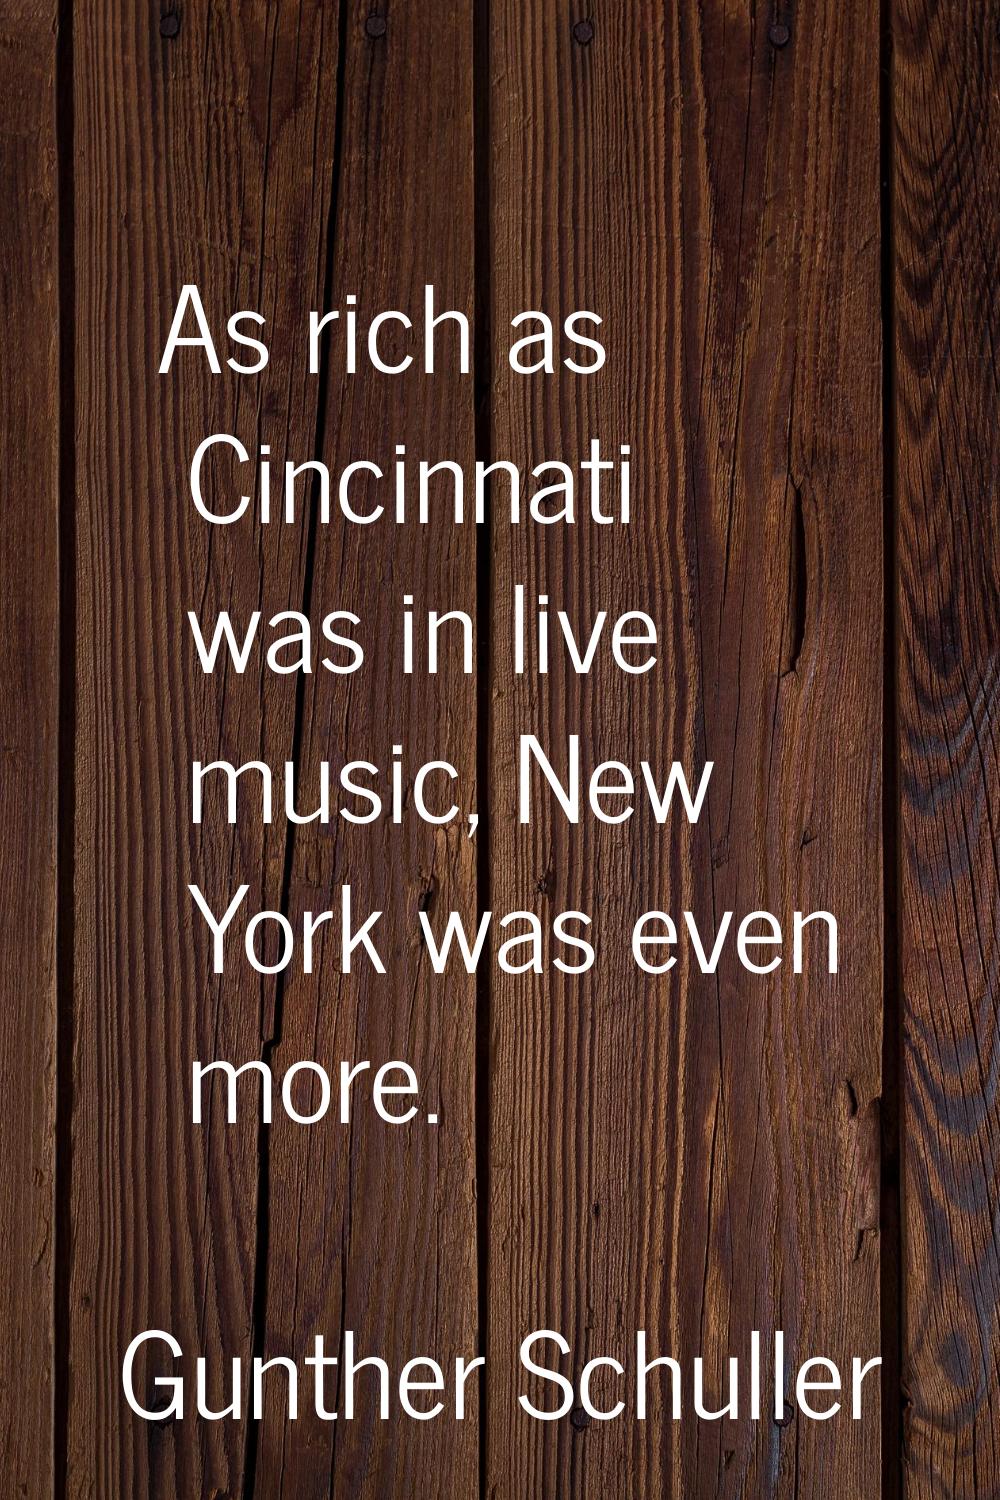 As rich as Cincinnati was in live music, New York was even more.